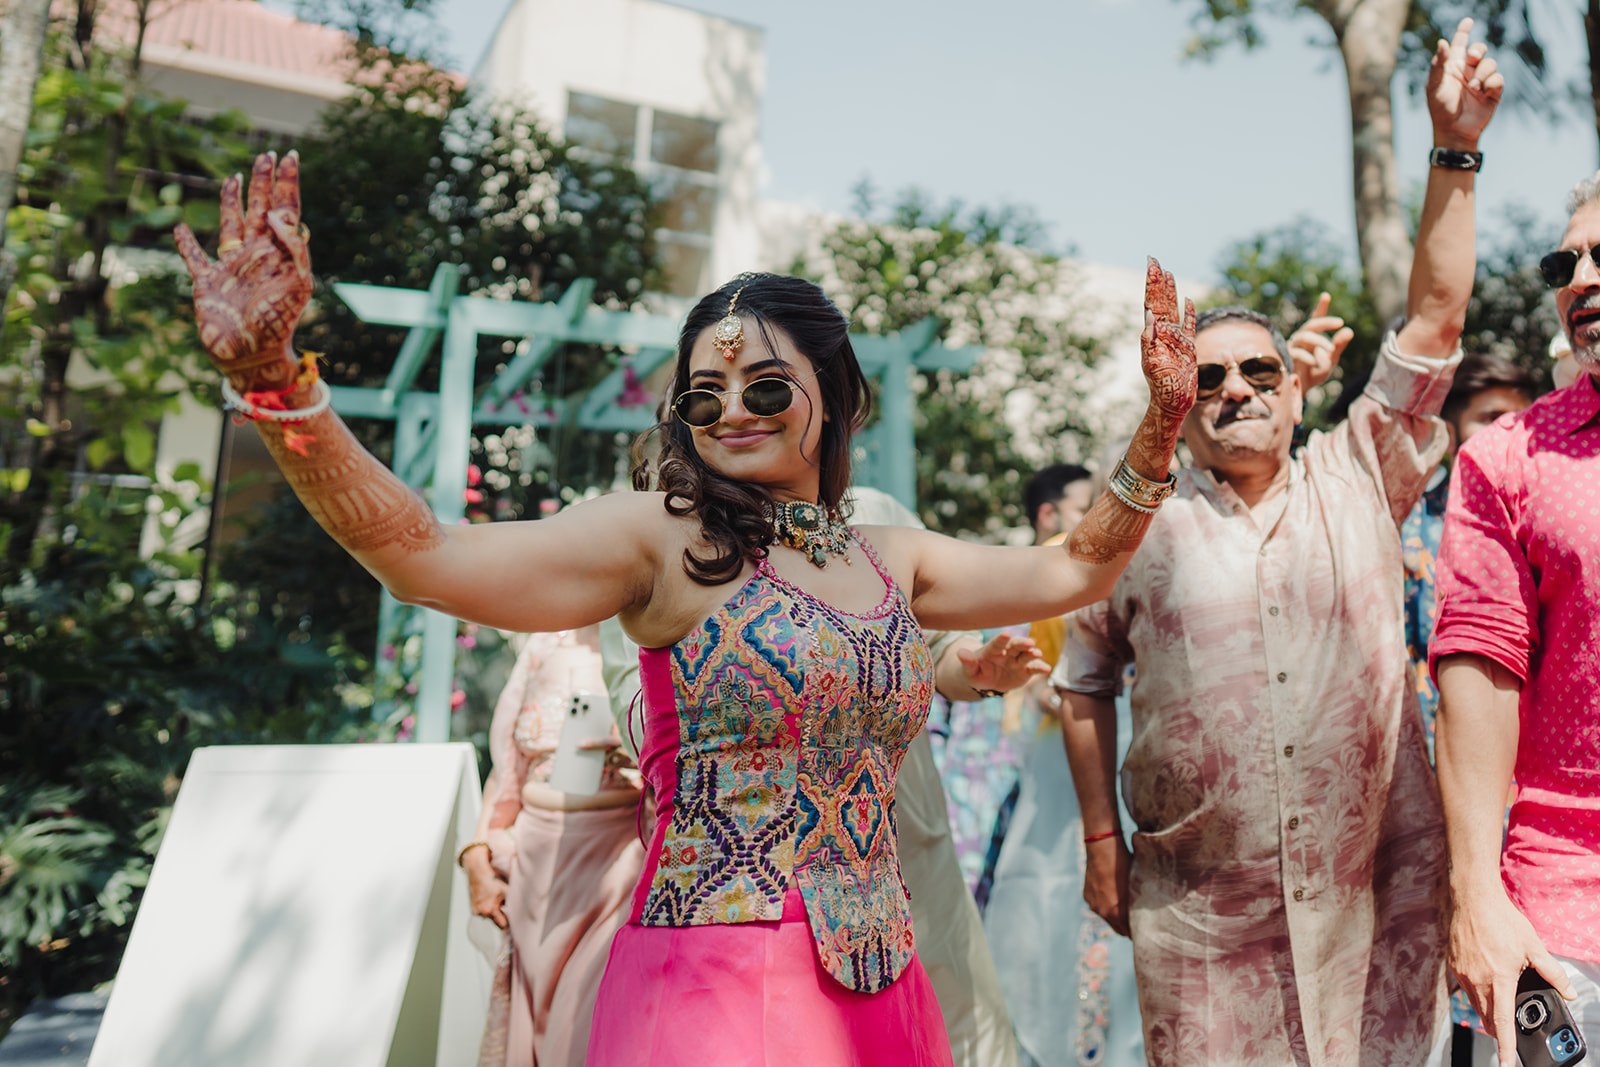 Dhol beats and dance: Bride creating a festive atmosphere with spirited movements